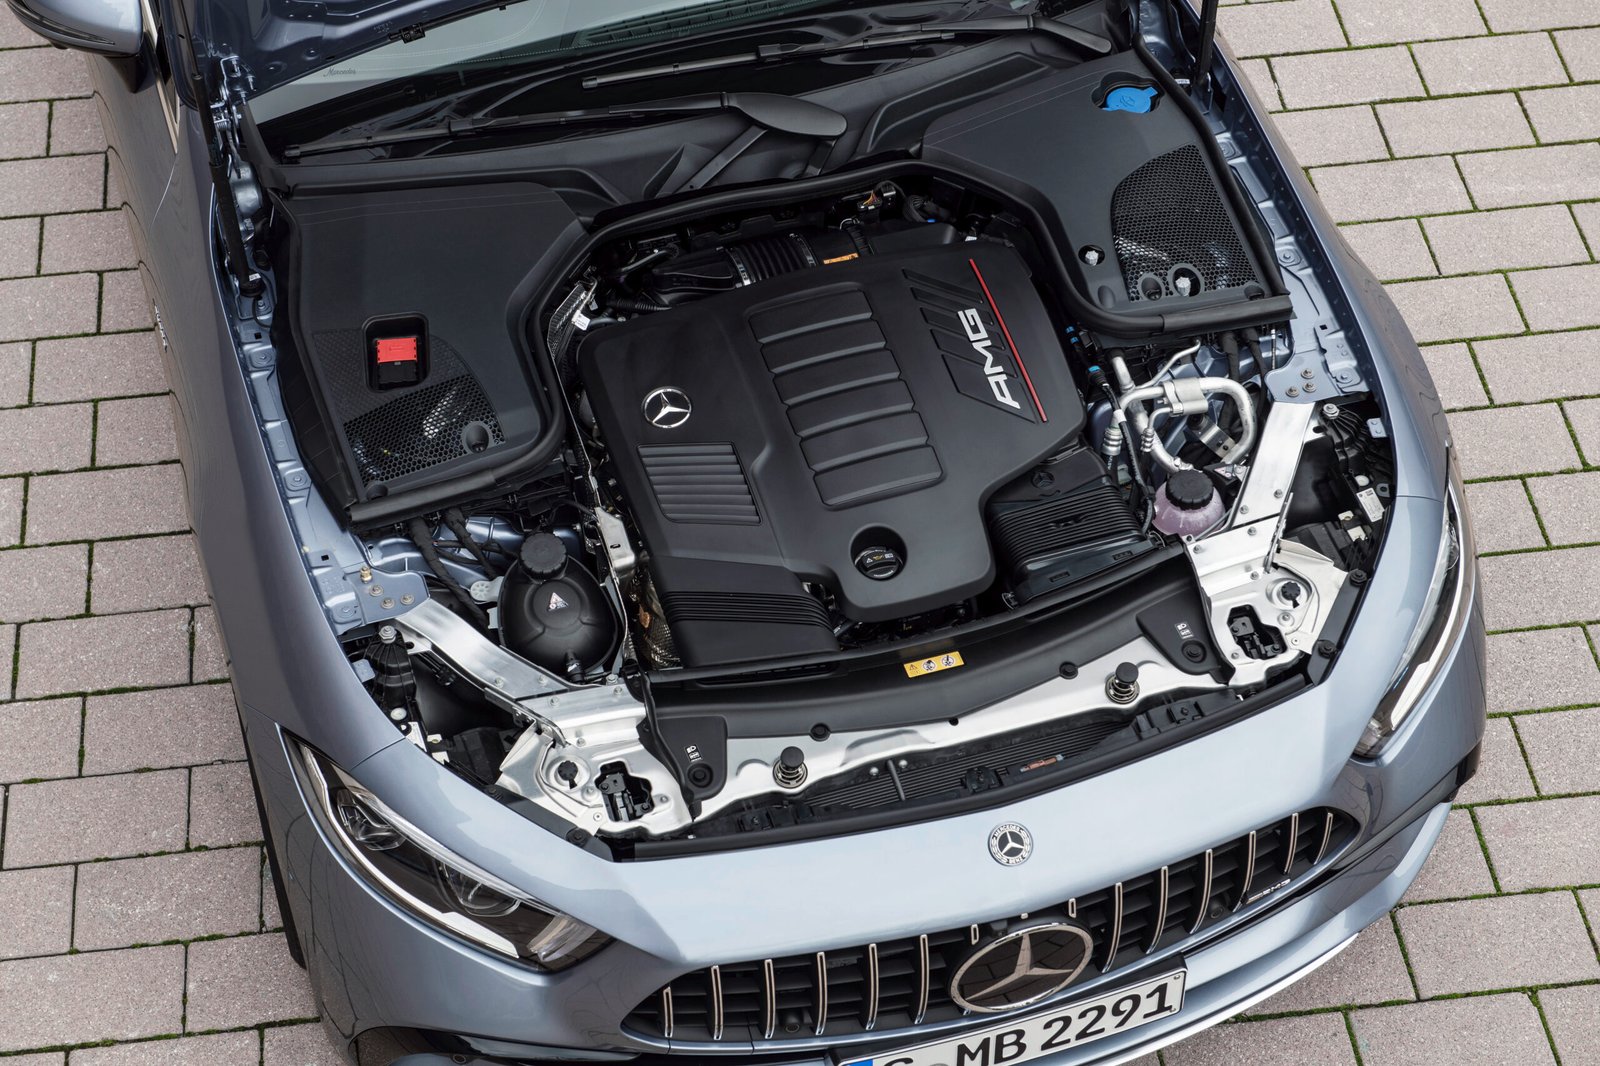 Mercedes-Benz Engines vs. the Competition